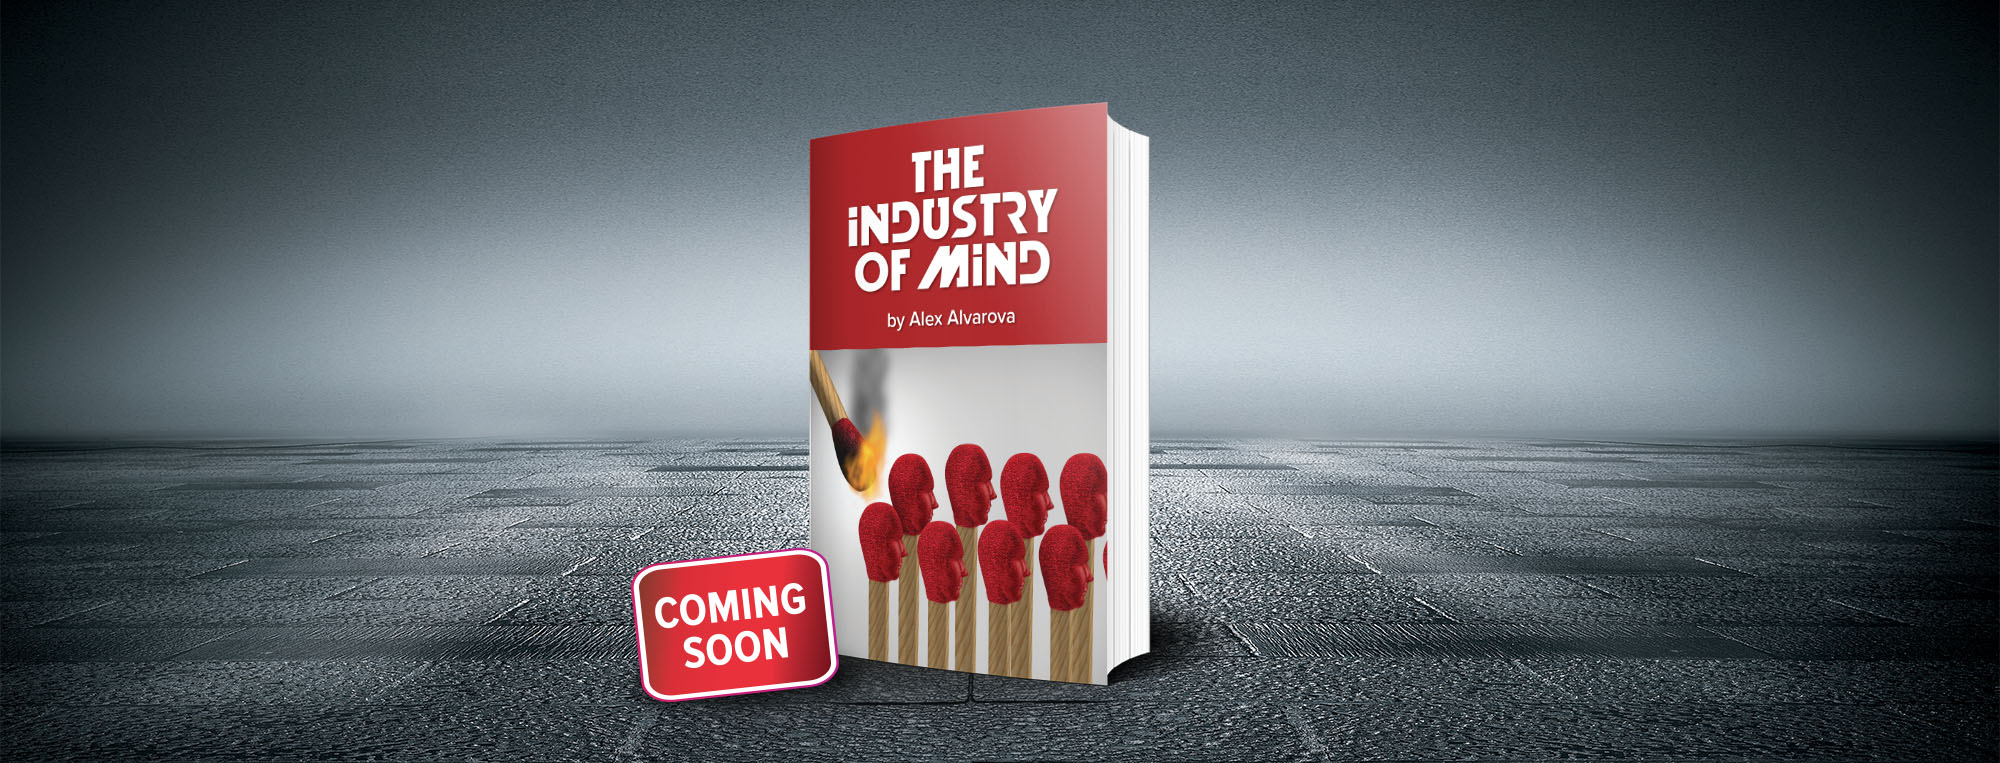 The book " The Industry of Lies" in czech language